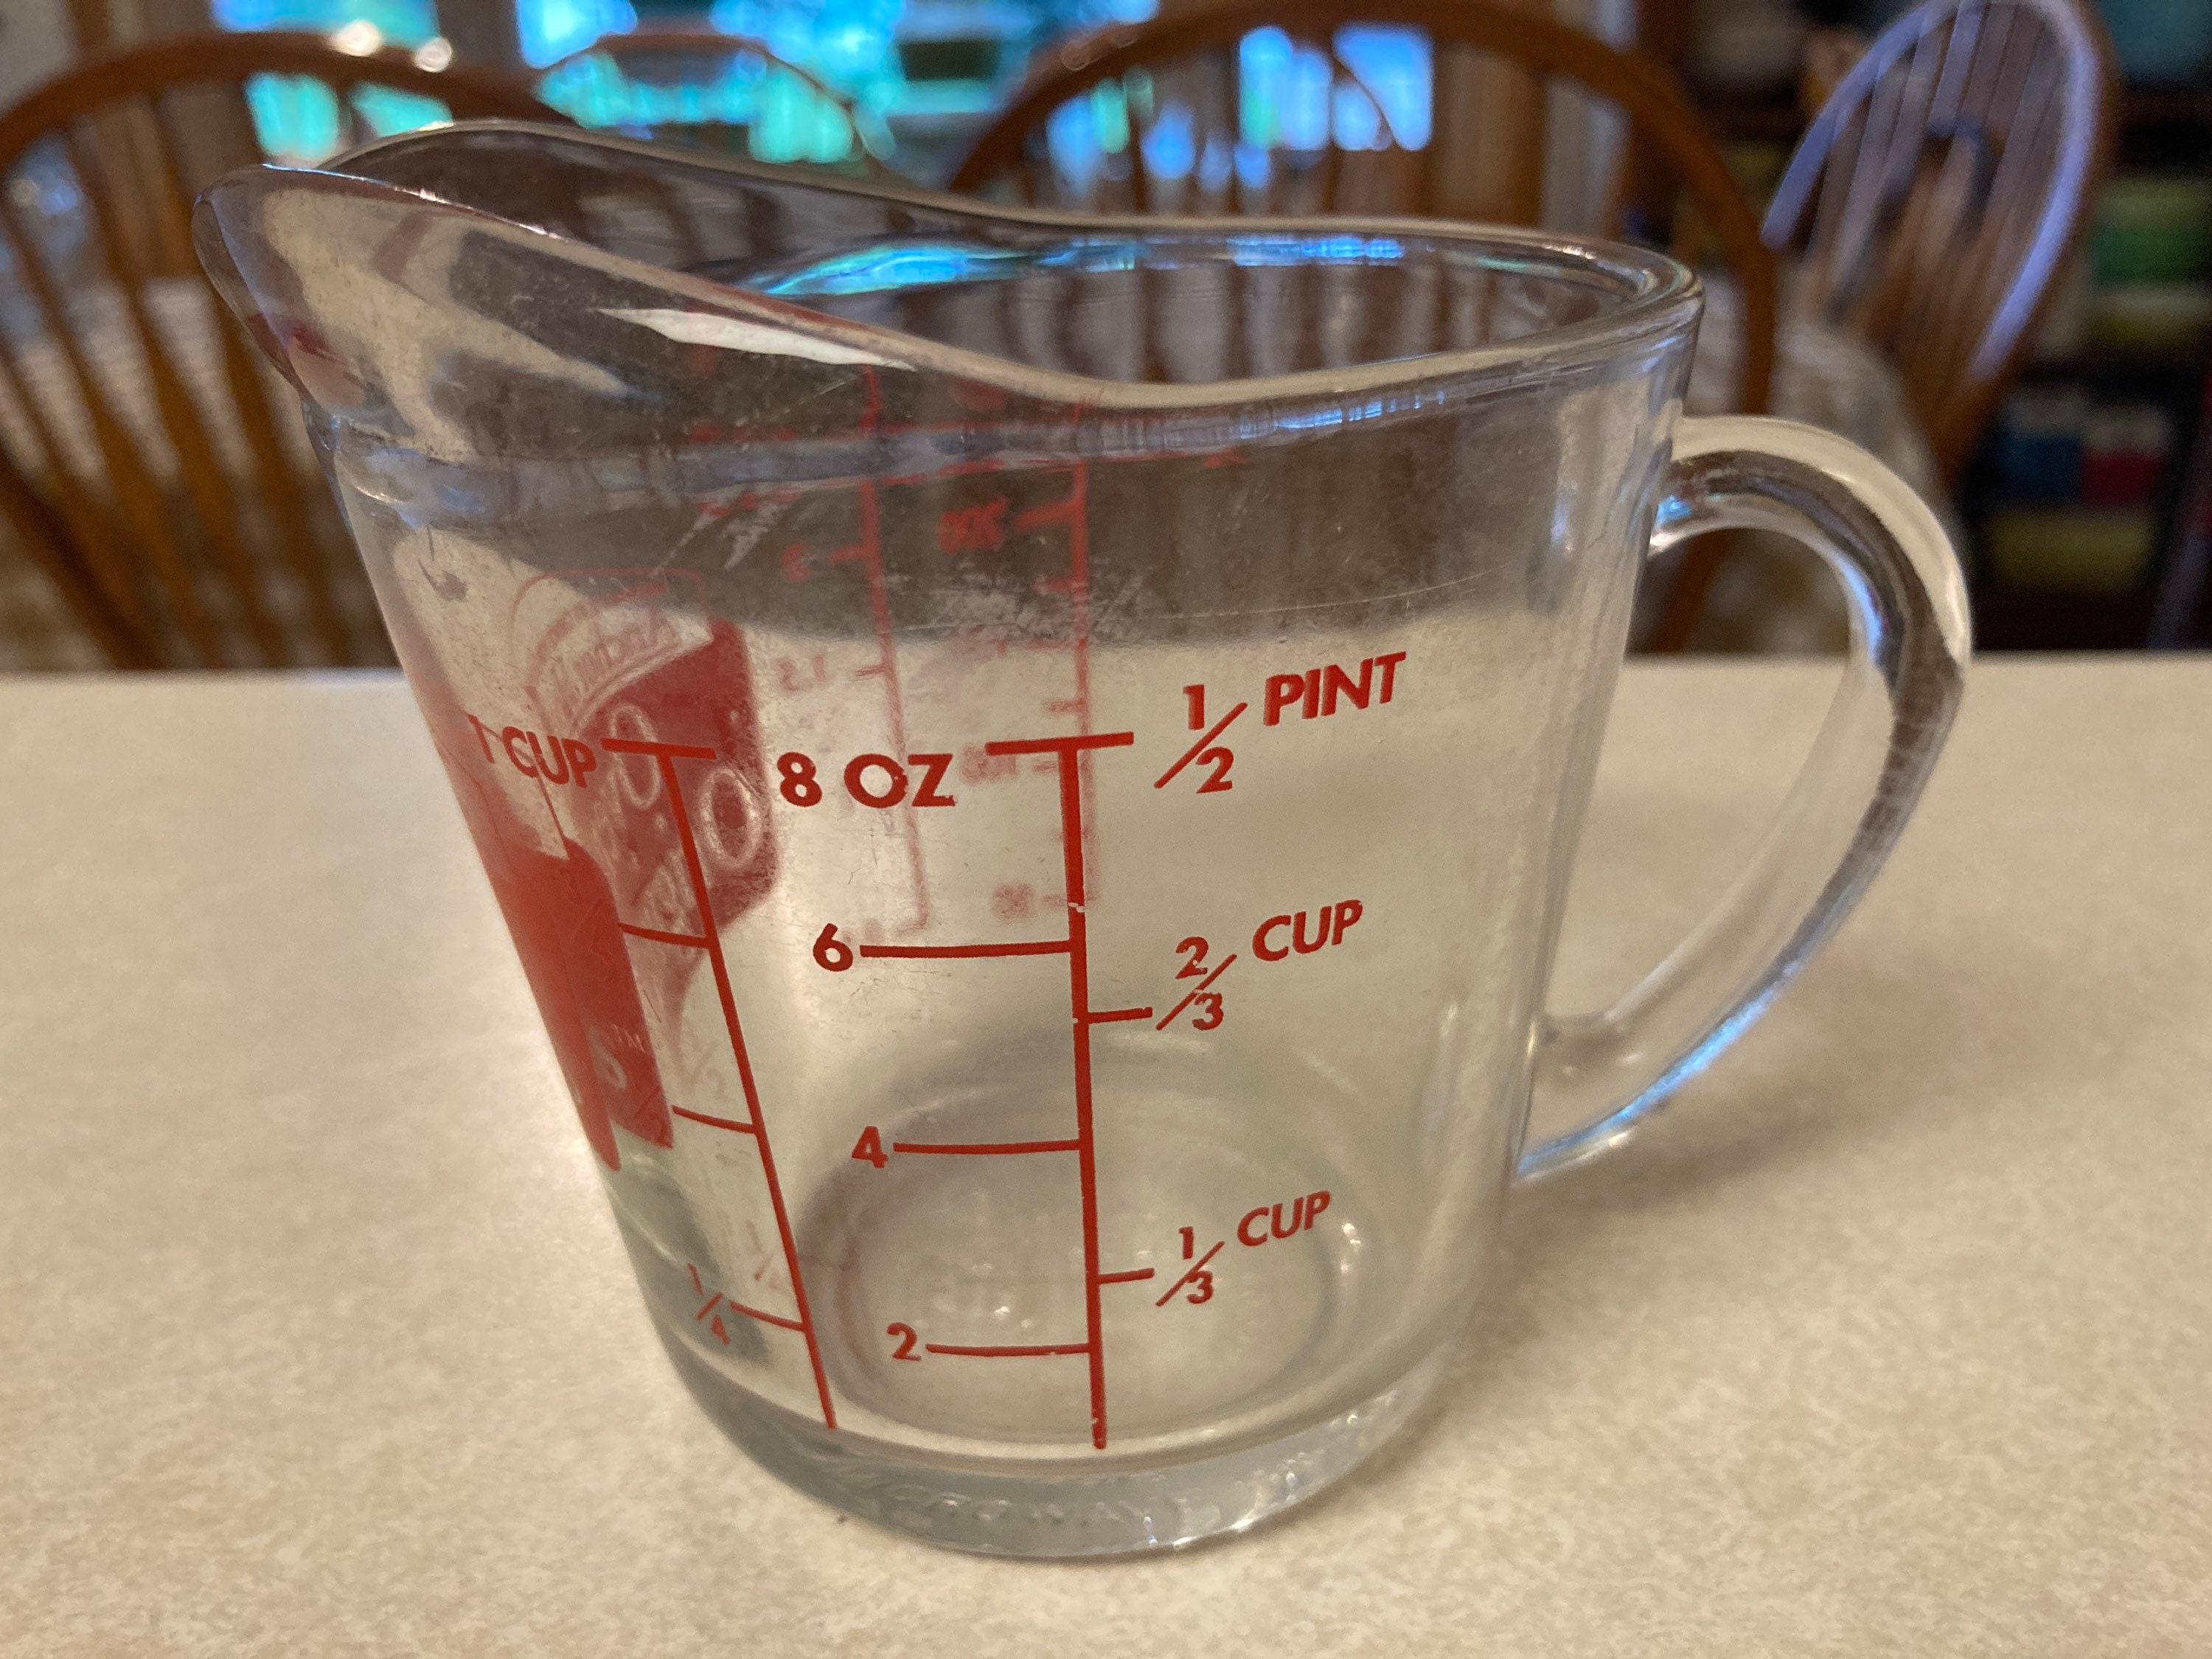 Anchor Hocking 4 Cup 1 Quart Glass Liquid Measuring Cup Red Letters 1 Litre  622